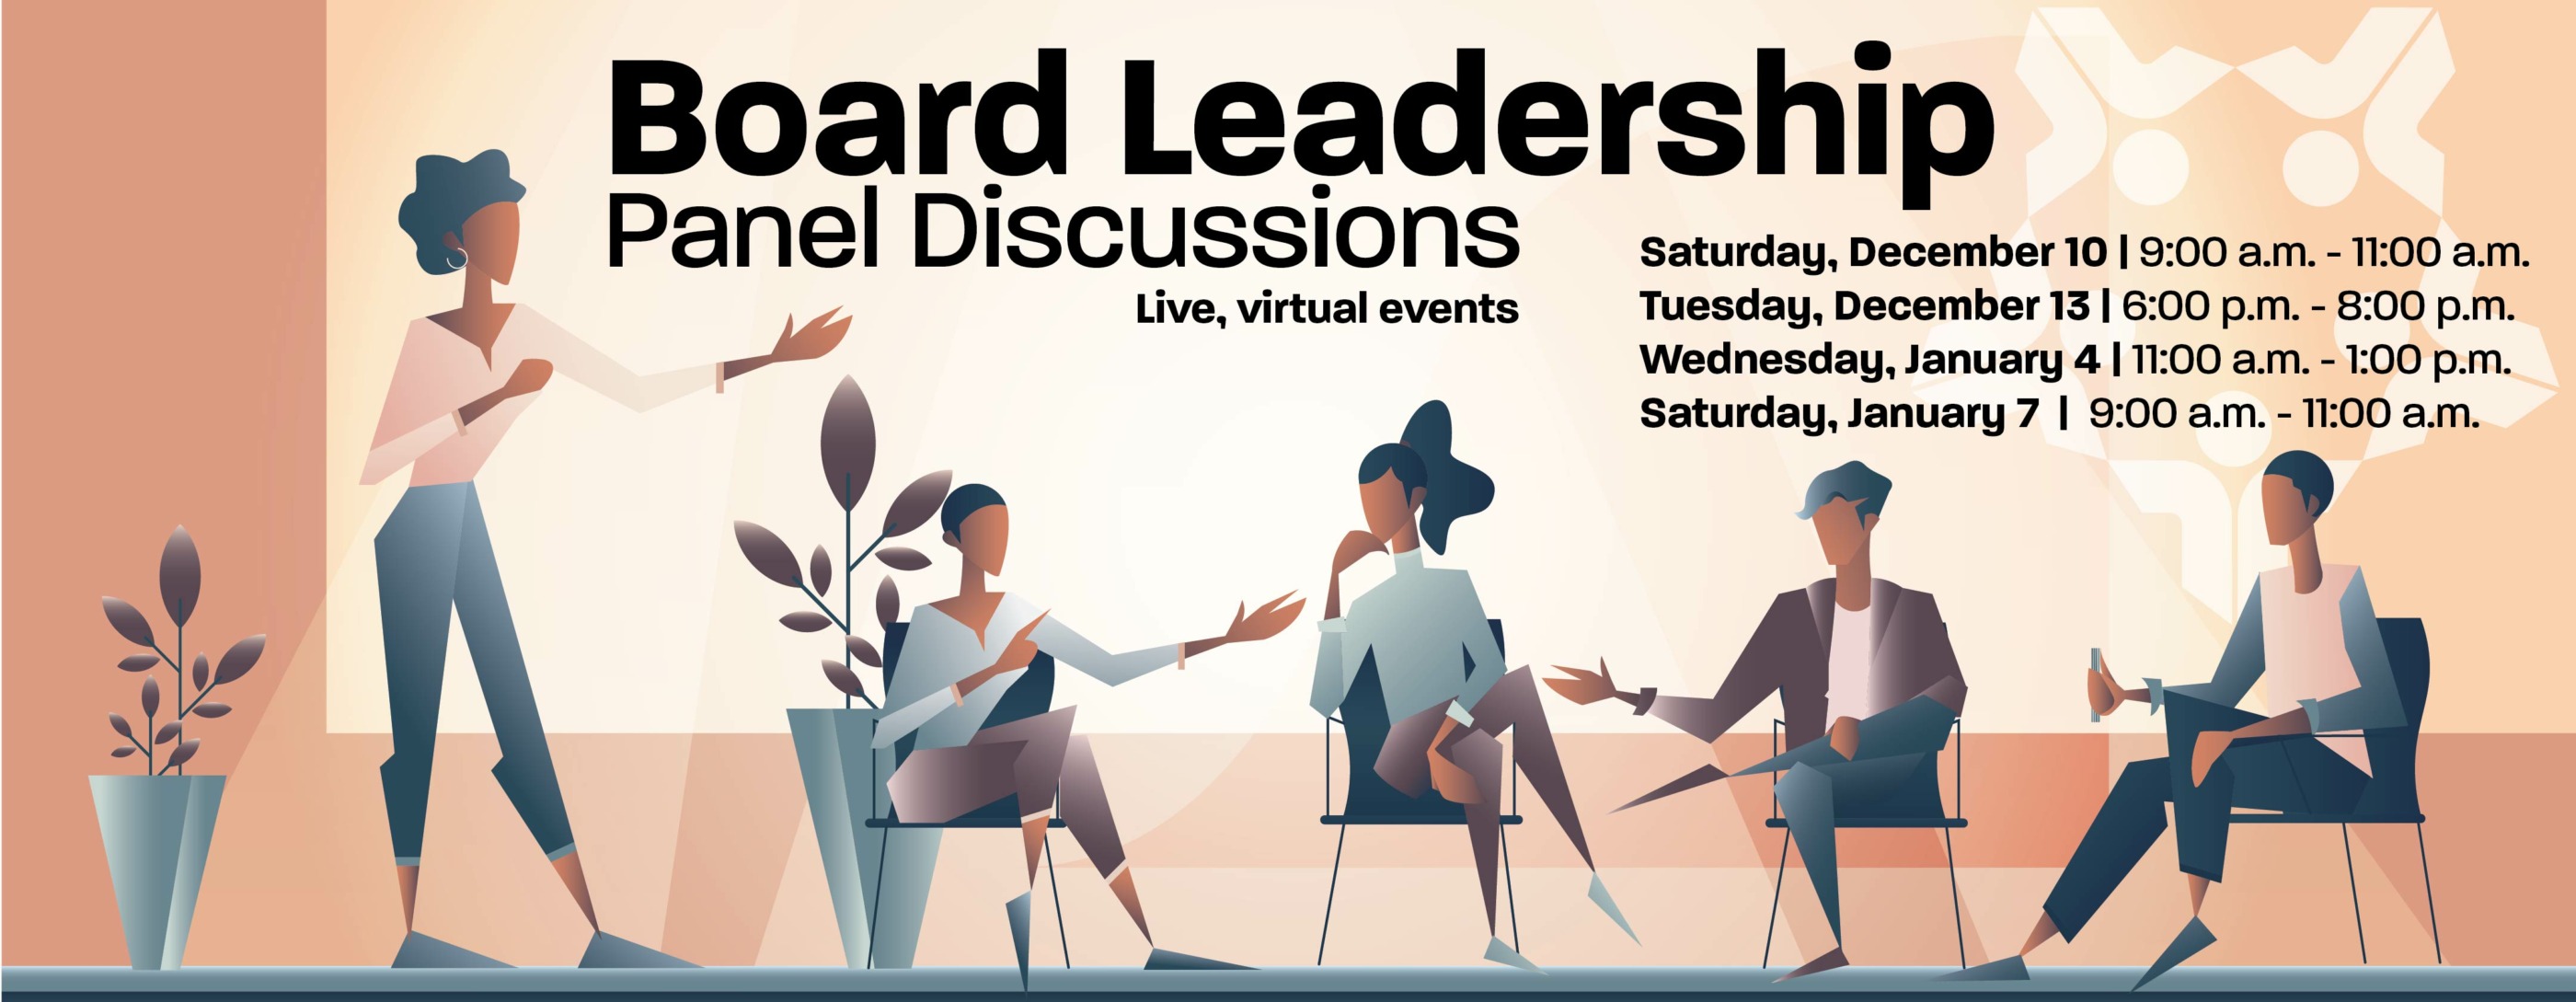 Board Leadership Panel Discussions